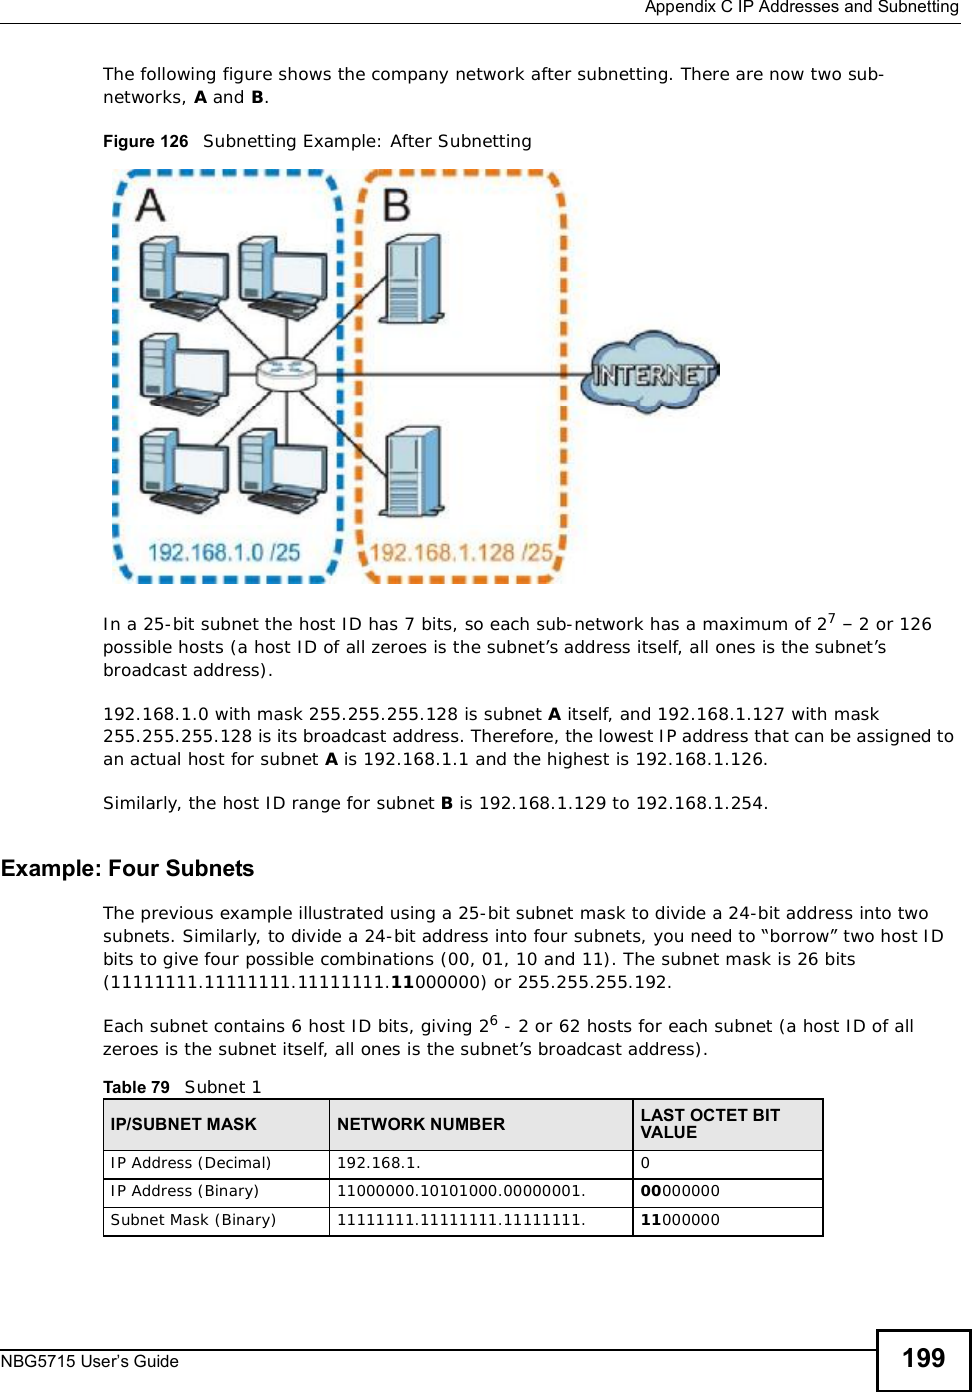  Appendix CIP Addresses and SubnettingNBG5715 User’s Guide 199The following figure shows the company network after subnetting. There are now two sub-networks, A and B.Figure 126   Subnetting Example: After SubnettingIn a 25-bit subnet the host ID has 7 bits, so each sub-network has a maximum of 27 – 2 or 126 possible hosts (a host ID of all zeroes is the subnet’s address itself, all ones is the subnet’s broadcast address).192.168.1.0 with mask 255.255.255.128 is subnet A itself, and 192.168.1.127 with mask 255.255.255.128 is its broadcast address. Therefore, the lowest IP address that can be assigned to an actual host for subnet A is 192.168.1.1 and the highest is 192.168.1.126. Similarly, the host ID range for subnet B is 192.168.1.129 to 192.168.1.254.Example: Four Subnets The previous example illustrated using a 25-bit subnet mask to divide a 24-bit address into two subnets. Similarly, to divide a 24-bit address into four subnets, you need to “borrow” two host ID bits to give four possible combinations (00, 01, 10 and 11). The subnet mask is 26 bits (11111111.11111111.11111111.11000000) or 255.255.255.192. Each subnet contains 6 host ID bits, giving 26 - 2 or 62 hosts for each subnet (a host ID of all zeroes is the subnet itself, all ones is the subnet’s broadcast address). Table 79   Subnet 1IP/SUBNET MASK NETWORK NUMBER LAST OCTET BIT VALUEIP Address (Decimal) 192.168.1. 0IP Address (Binary) 11000000.10101000.00000001. 00000000Subnet Mask (Binary) 11111111.11111111.11111111. 11000000